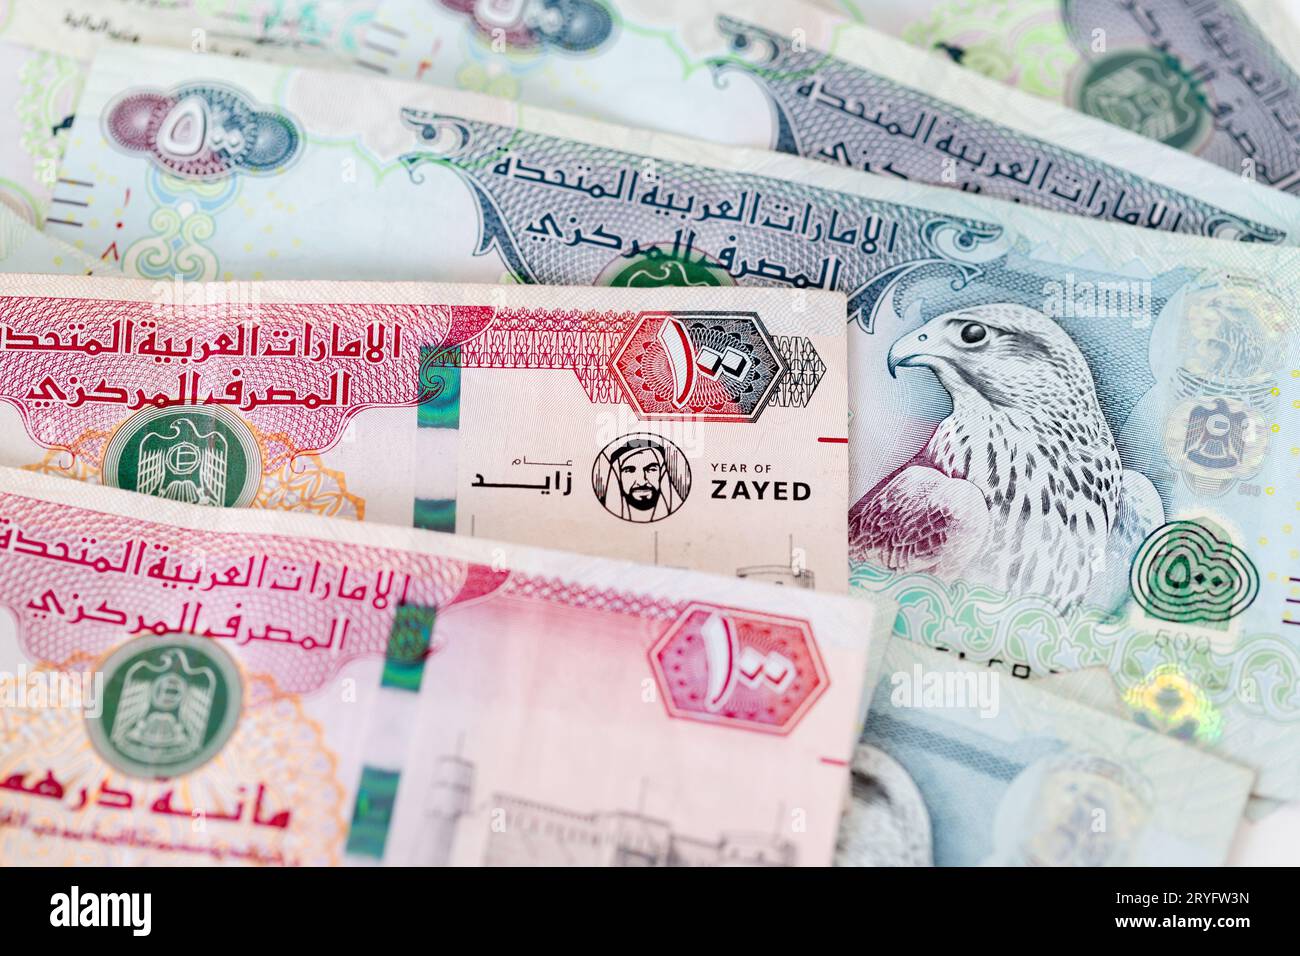 UAE dirhams, paper money, one and five hundred dirhams banknotes, closeup view Stock Photo